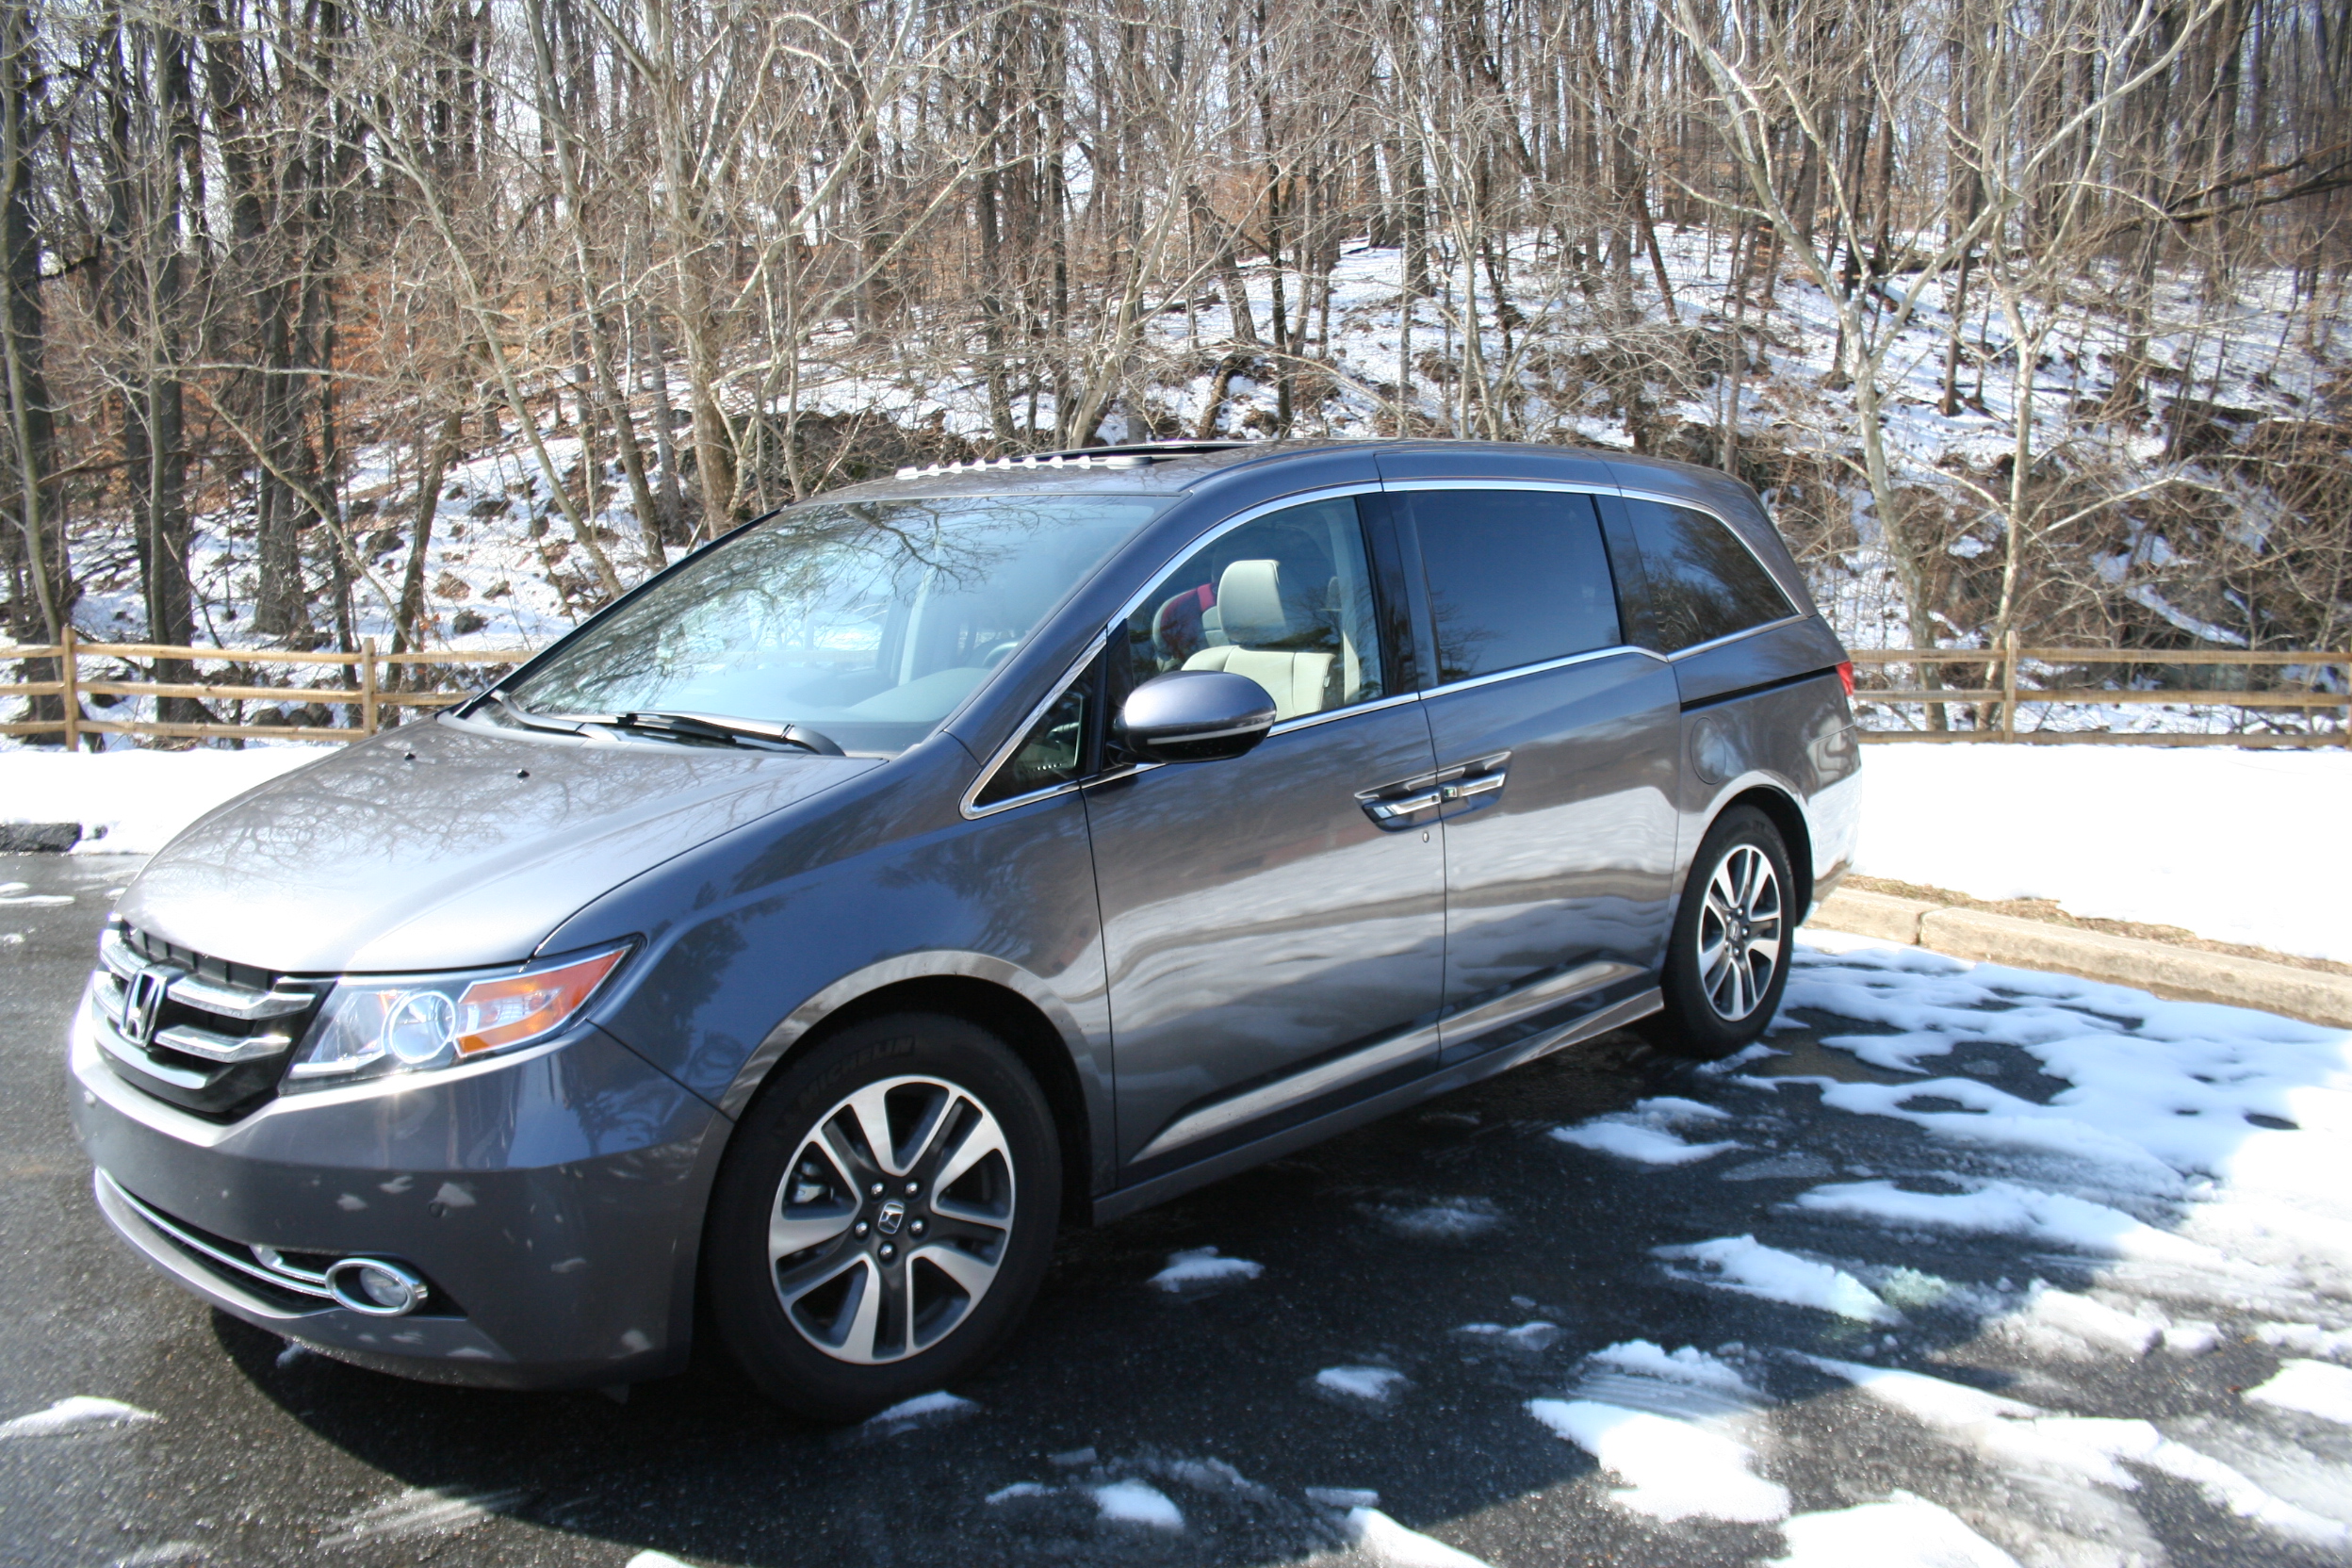 Car Report: 2014 Honda Odyssey is exciting, for a minivan